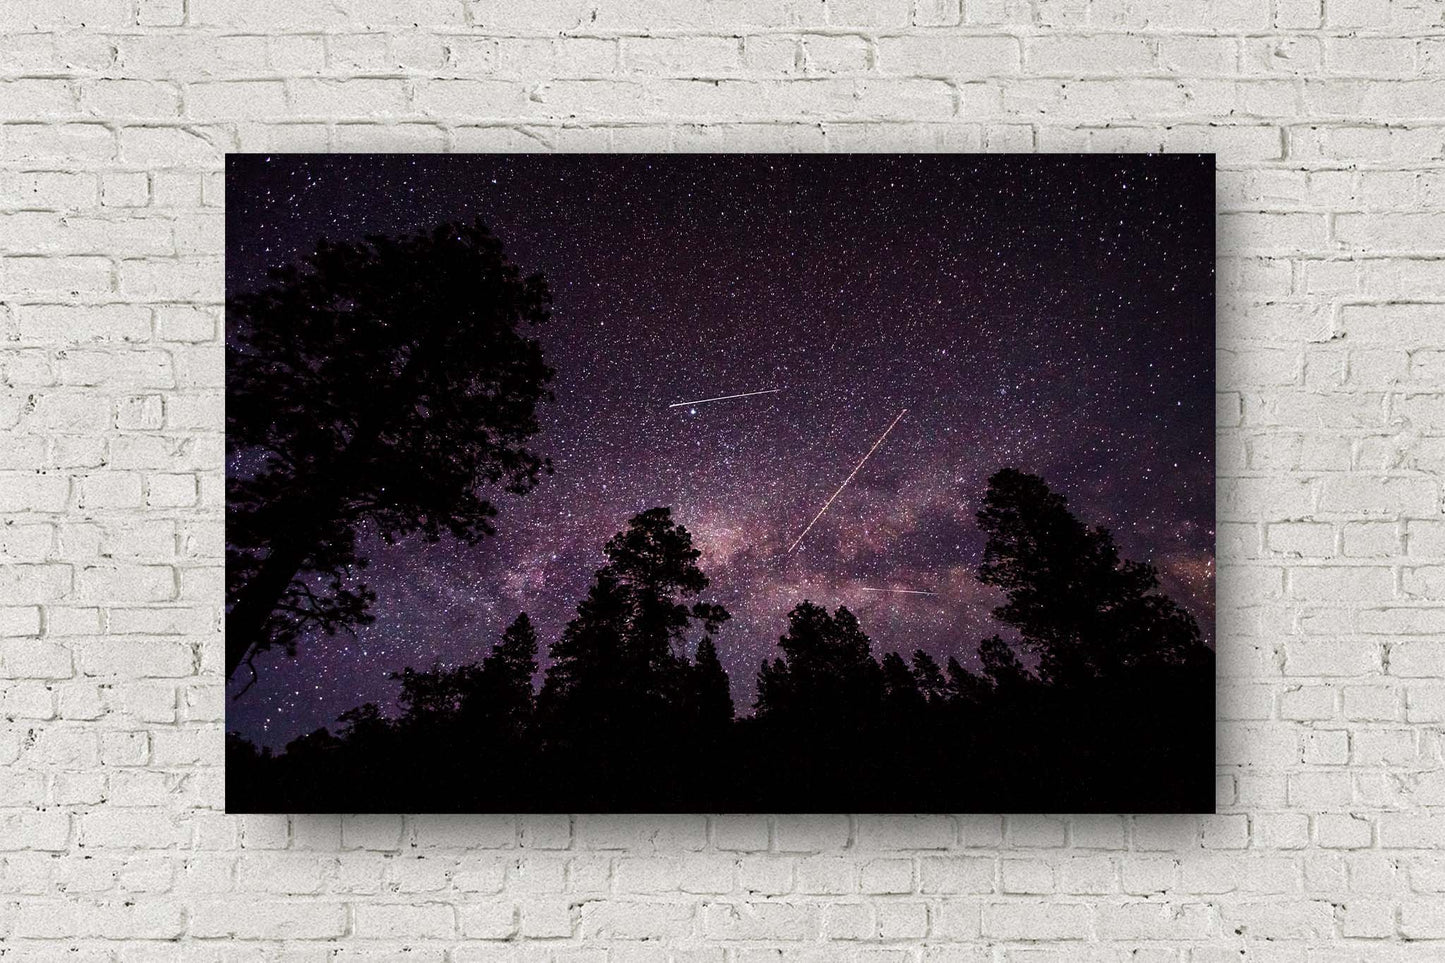 Celestial metal print of shooting stars, planes and satellites crossing the night sky in front of the Milky Way on a clear night in the Rocky Mountains of Colorado by Sean Ramsey of Southern Plains Photography.